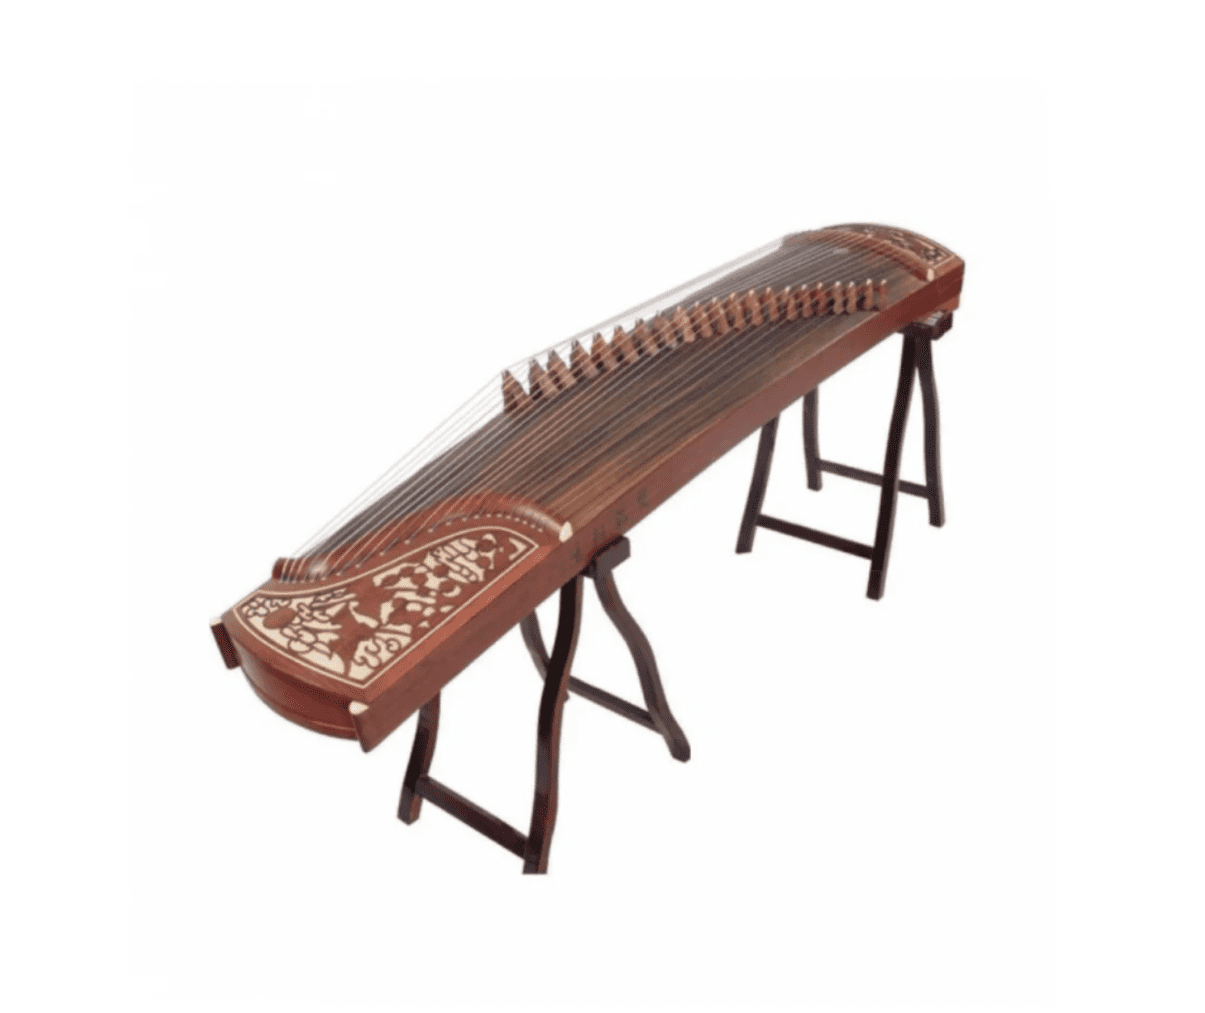 An ornate Guzheng 古箏, a traditional chinese stringed musical instrument, displayed on a wooden stand against a plain background.